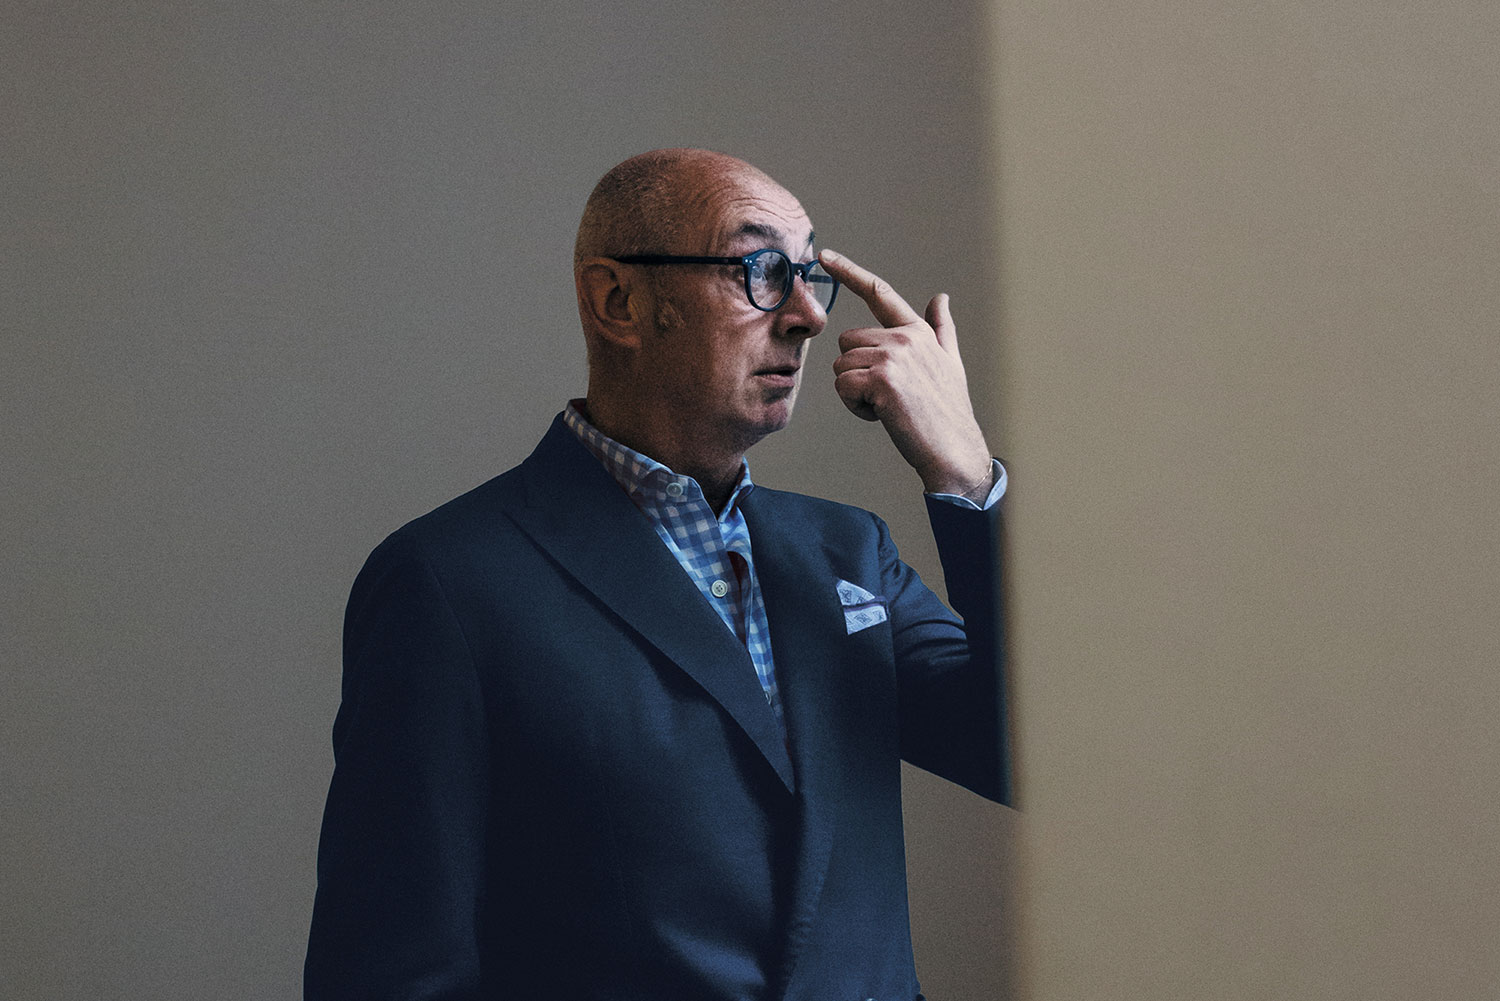 Portrait of Piero Lissoni in a suit and pushing his glasses up on his nose